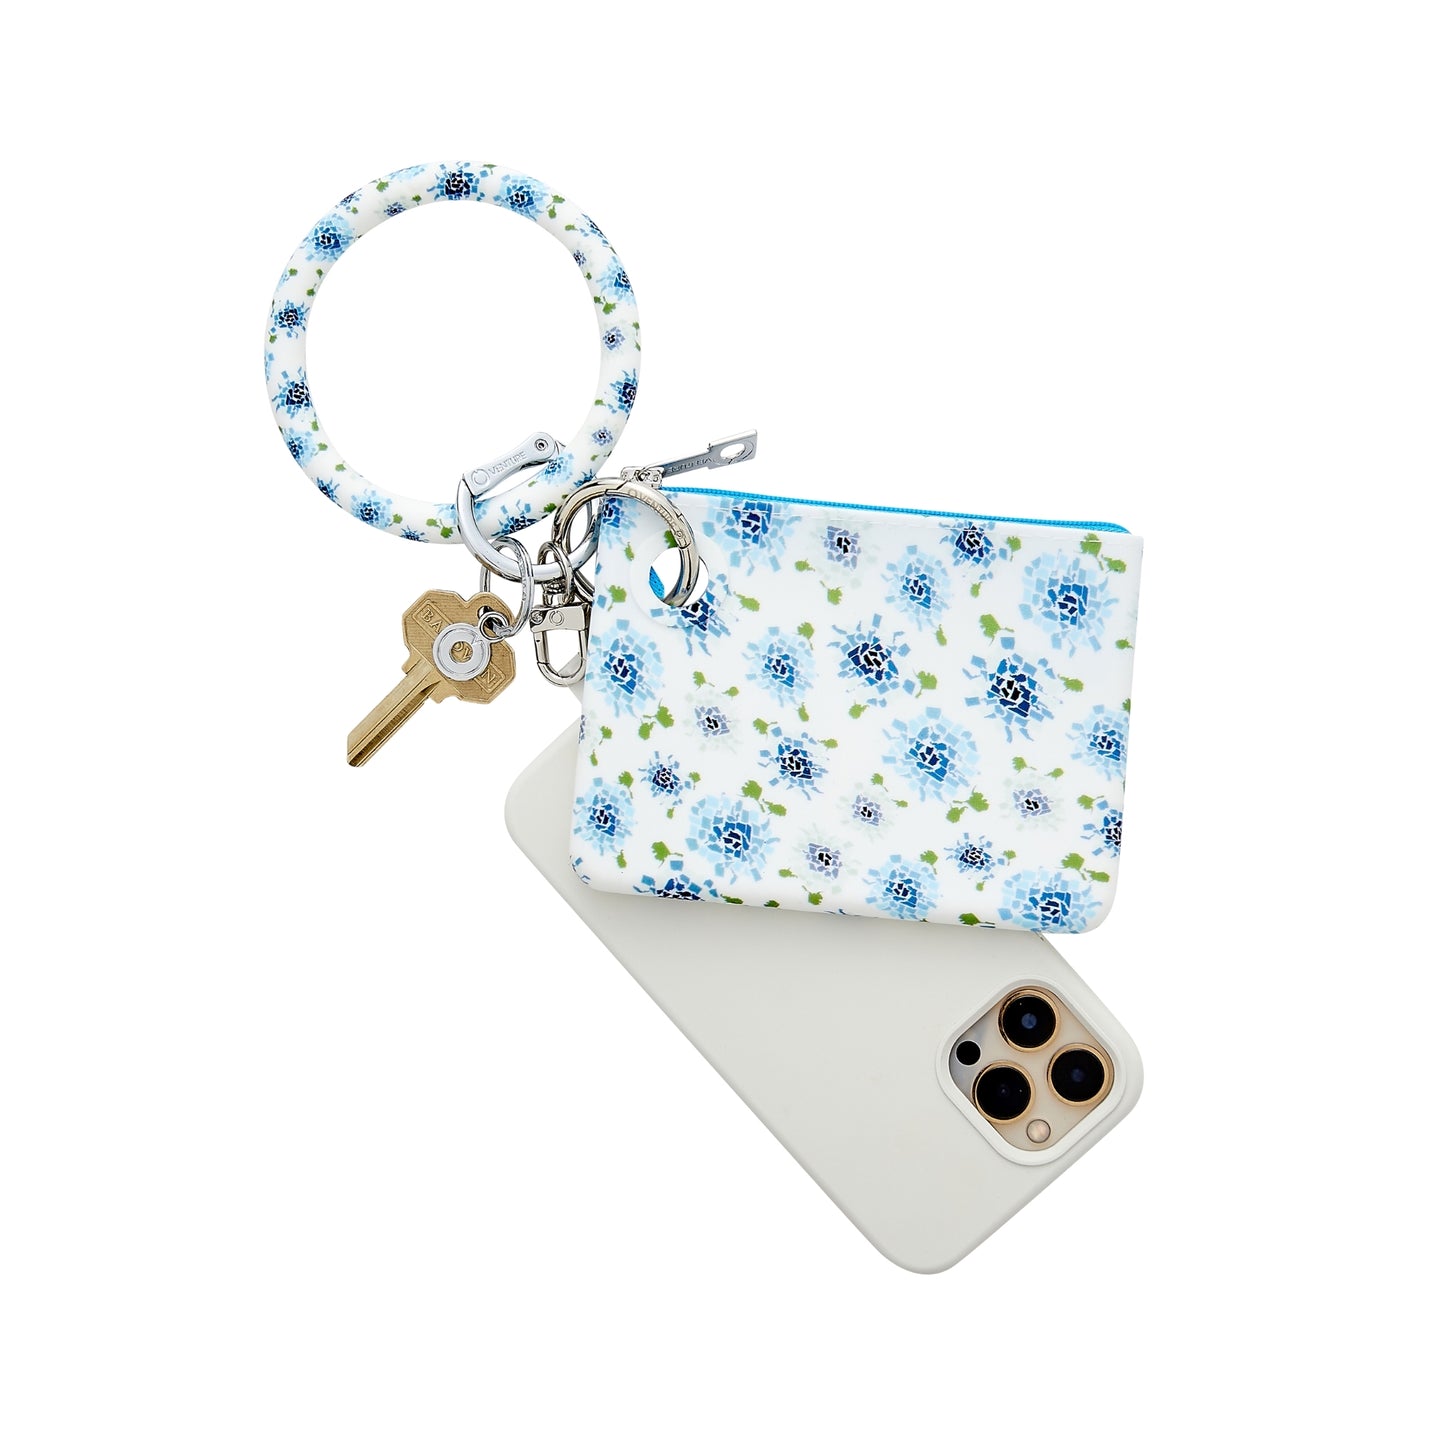 A chic and functional pouch wristlet accessory shown in a blue hydrangea print.